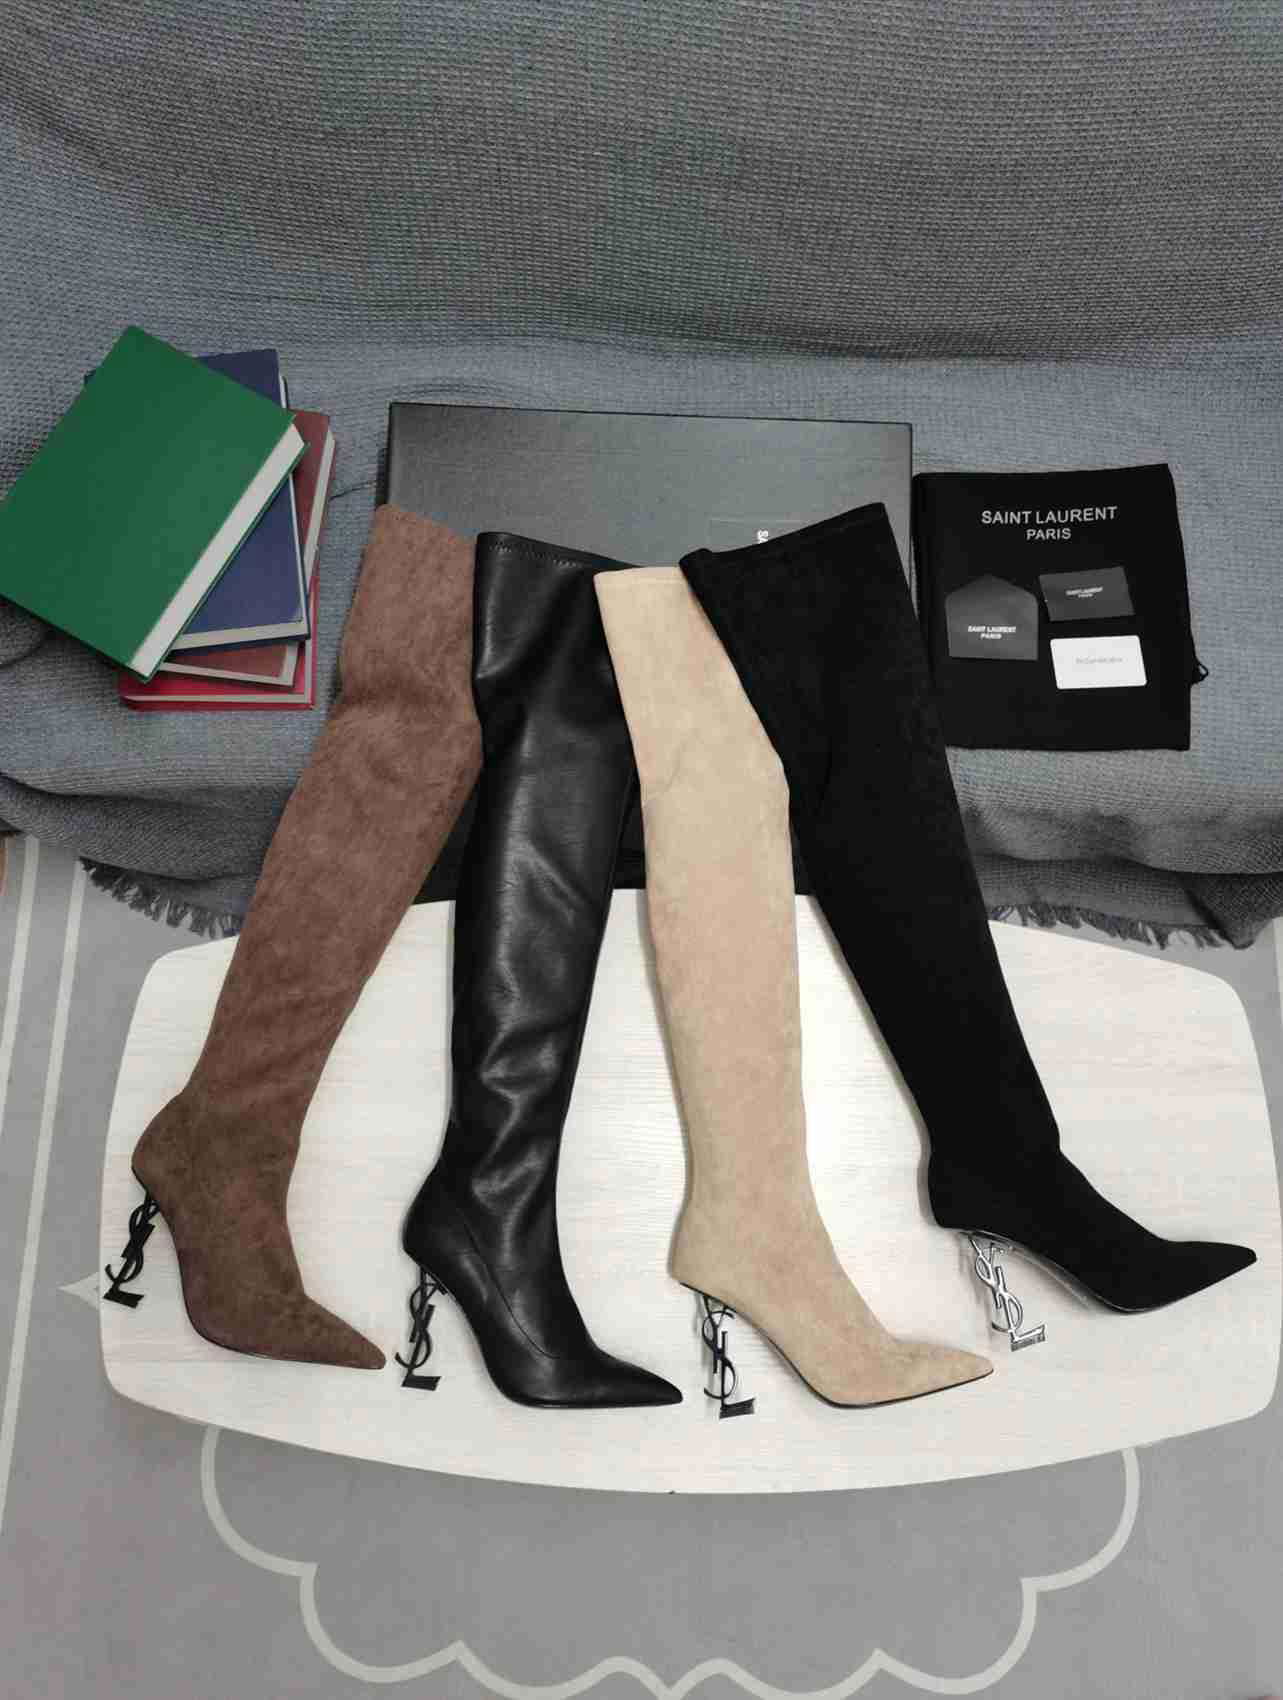     ANKLE BOOT high heel over knee heeled     boots thigh high boots 4